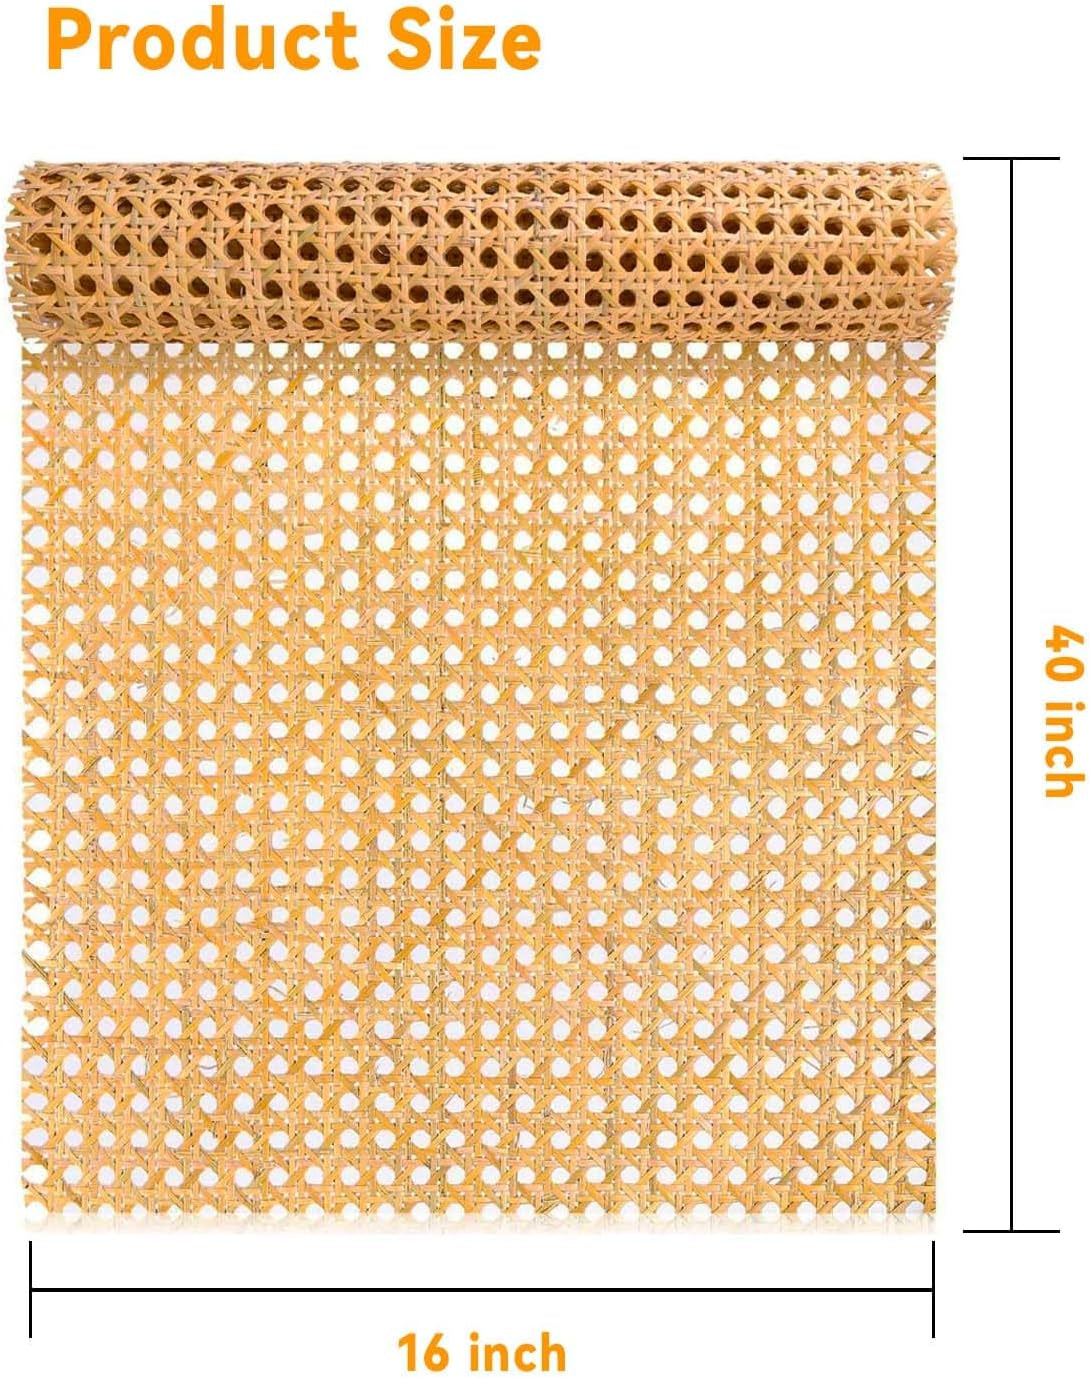 16-Inch Wide Natural Rattan Webbing 40-Inch Long (3.3 Ft.) Rattan Webbing Rolls for Furniture, Chairs, Cabinets, Ceilings, Beds Rattan Projects Basket Weaving Supplies Open Mesh Rattan